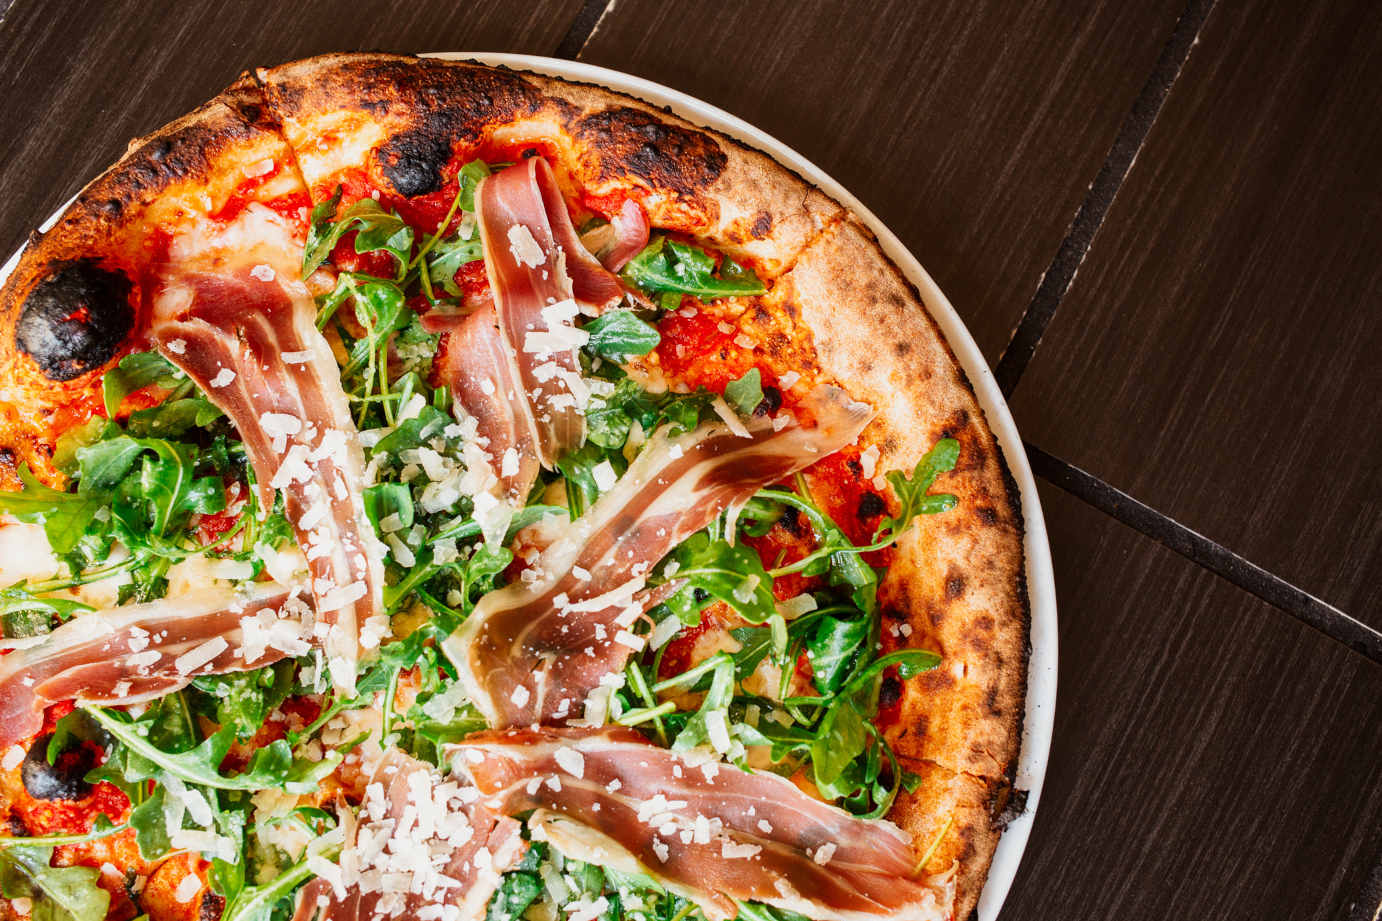 A pizza topped with cheese, prosciutto and arugula